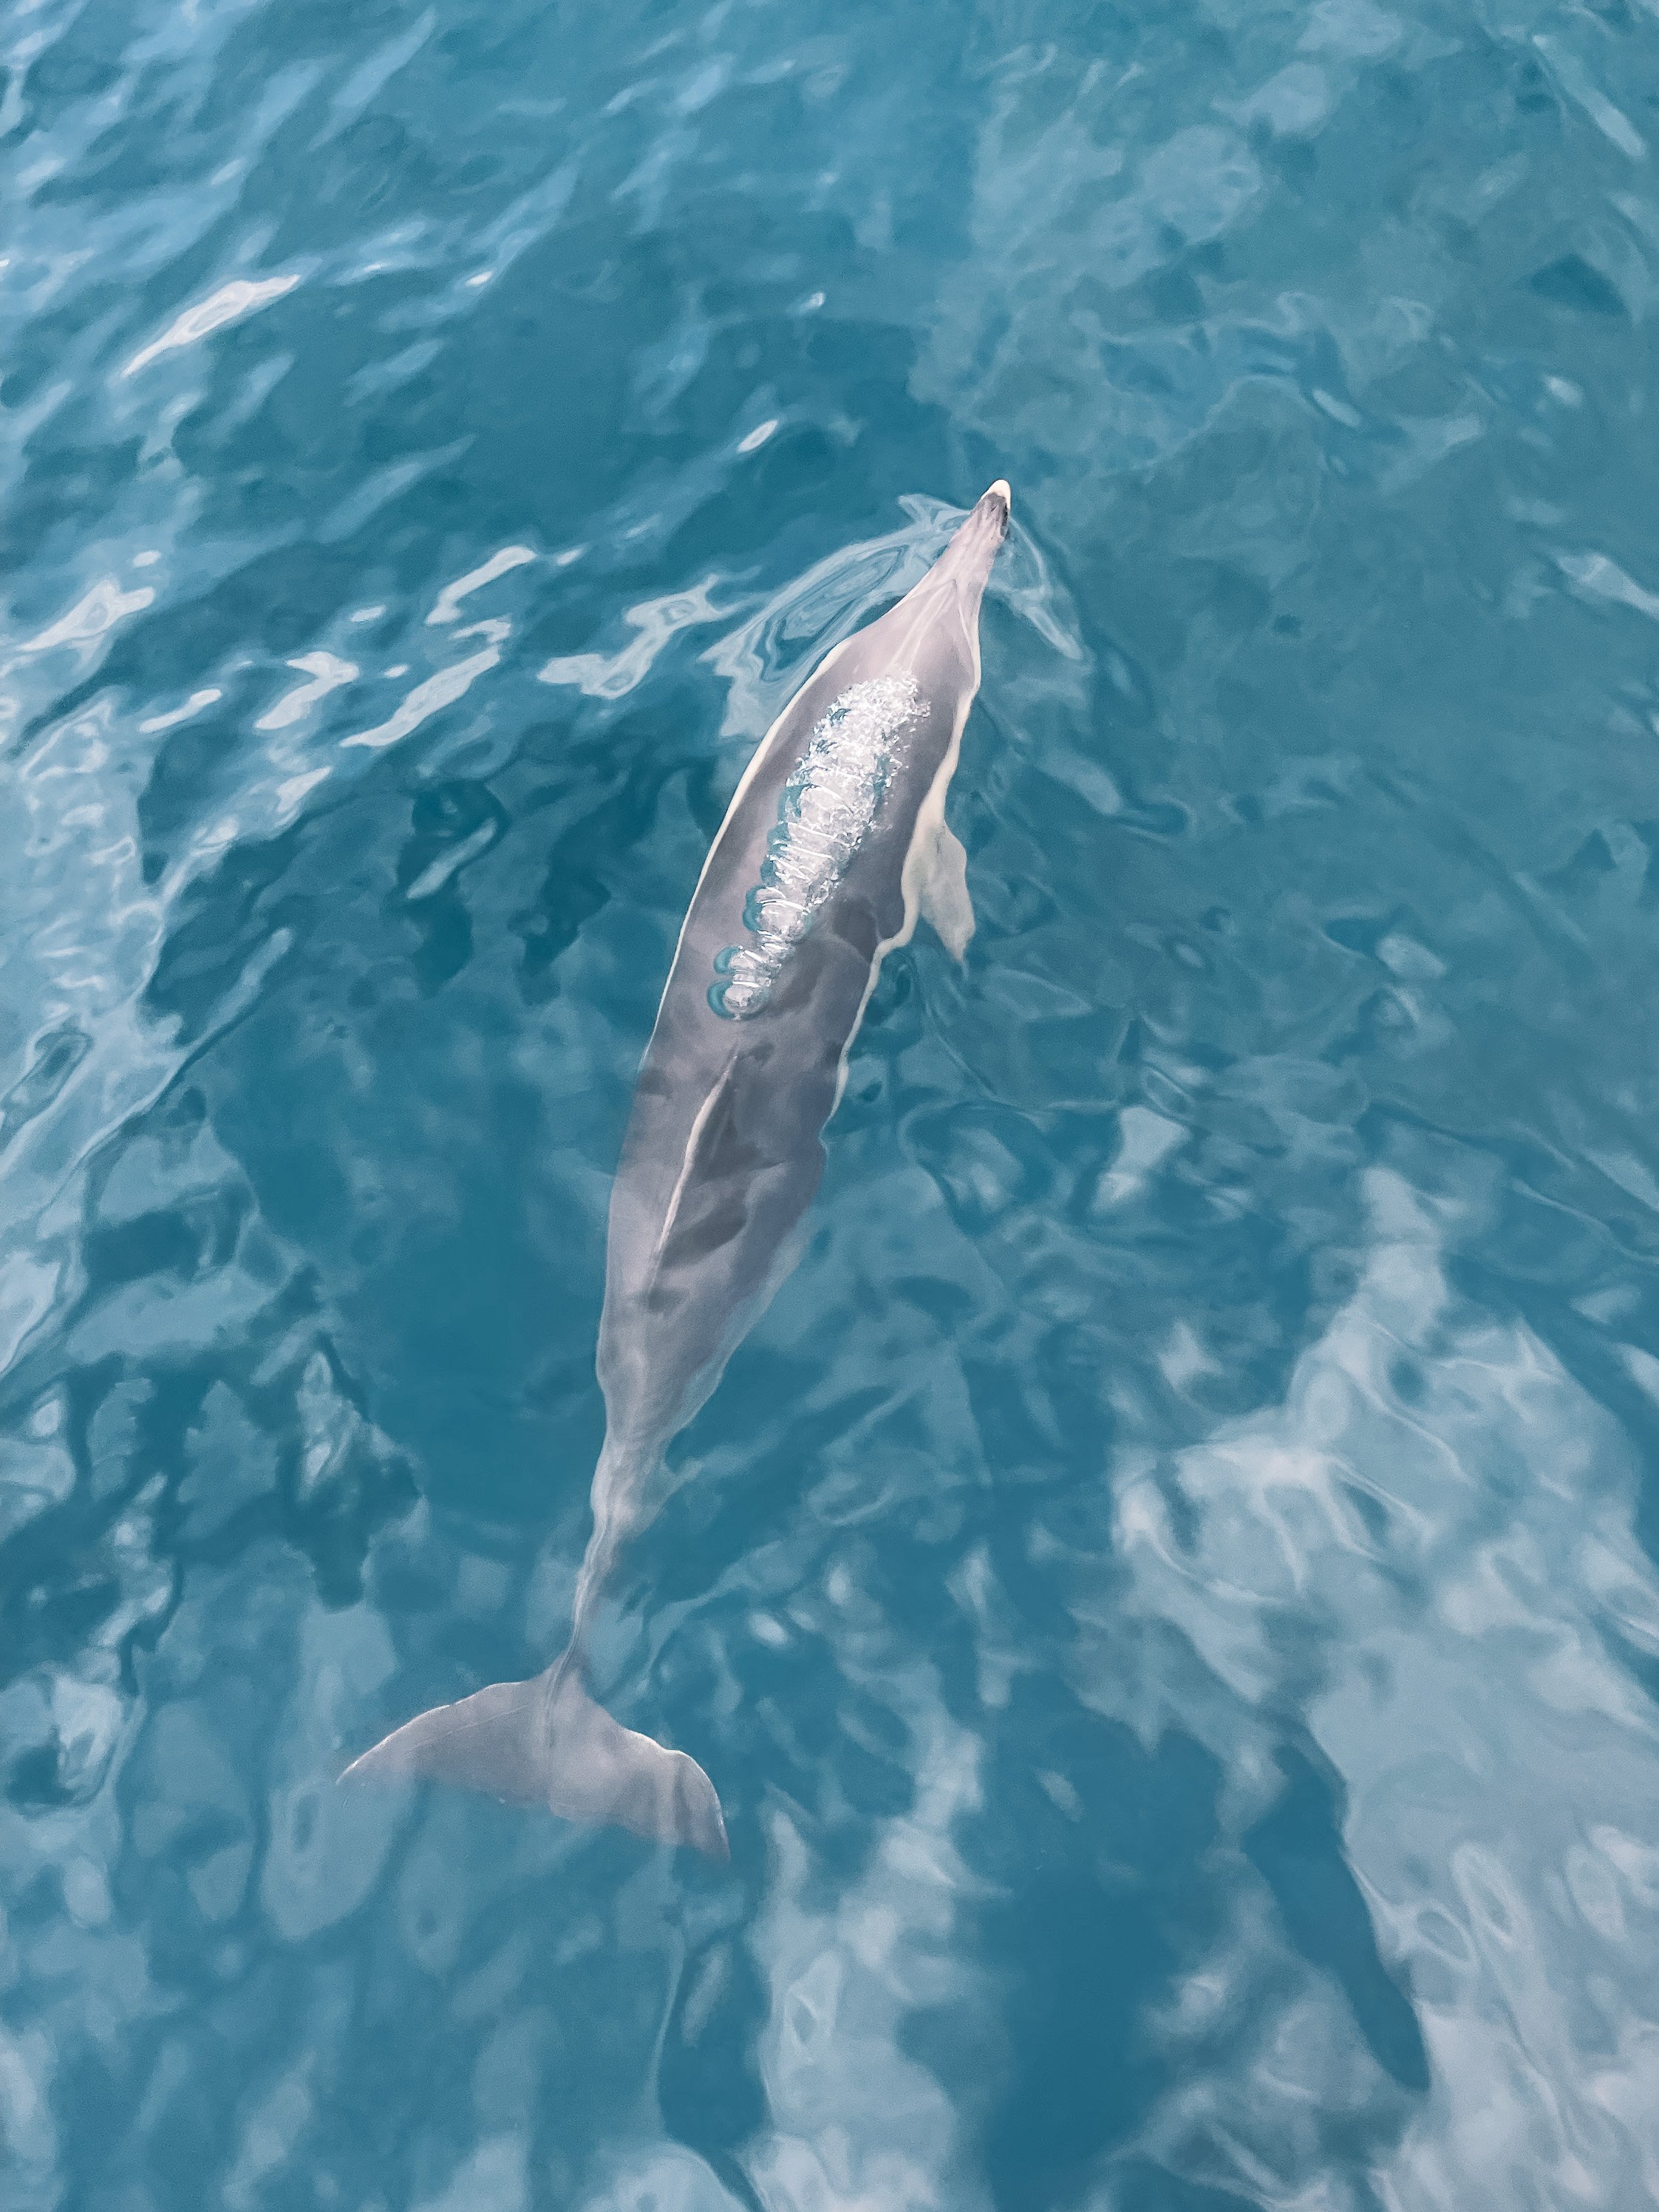 Curious dolphin swimming around the boat - Port Stephens - New South Wales (NSW) - Australia